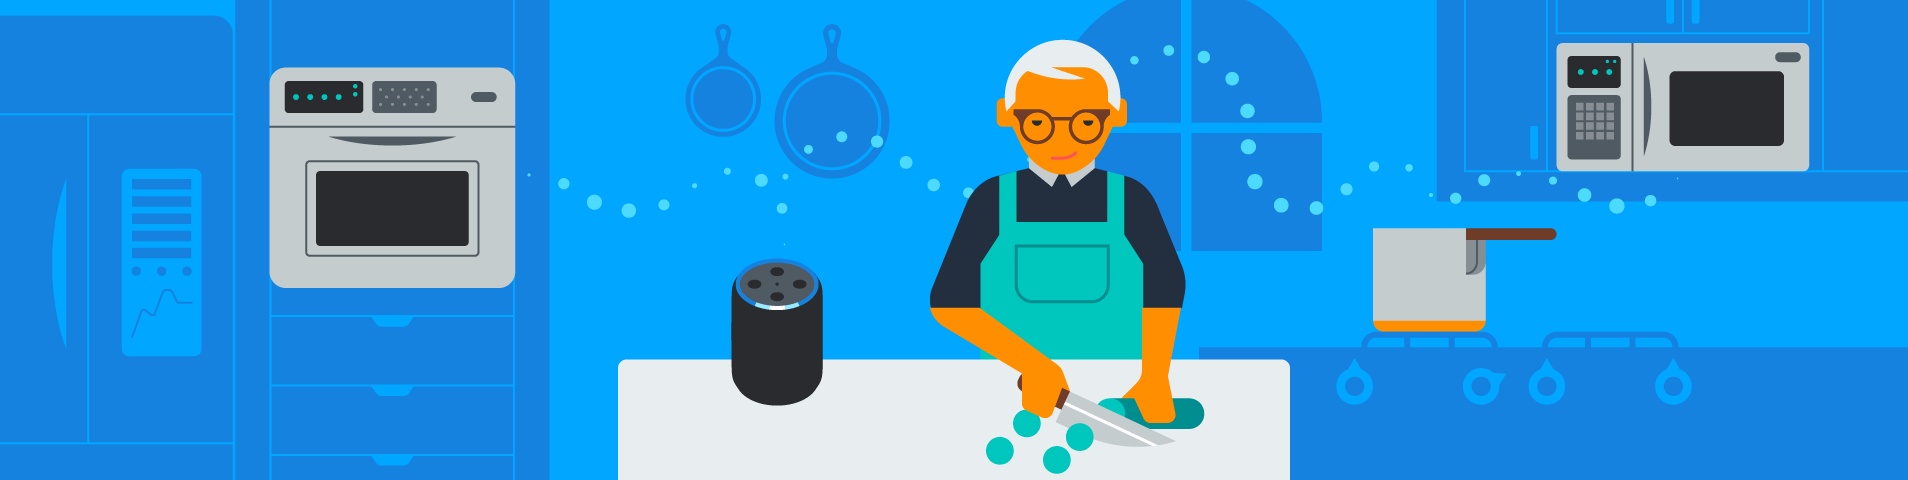 Coming Soon: Updated Smart Home Skill API Enables Alexa to Control More Types of Cooking Appliances